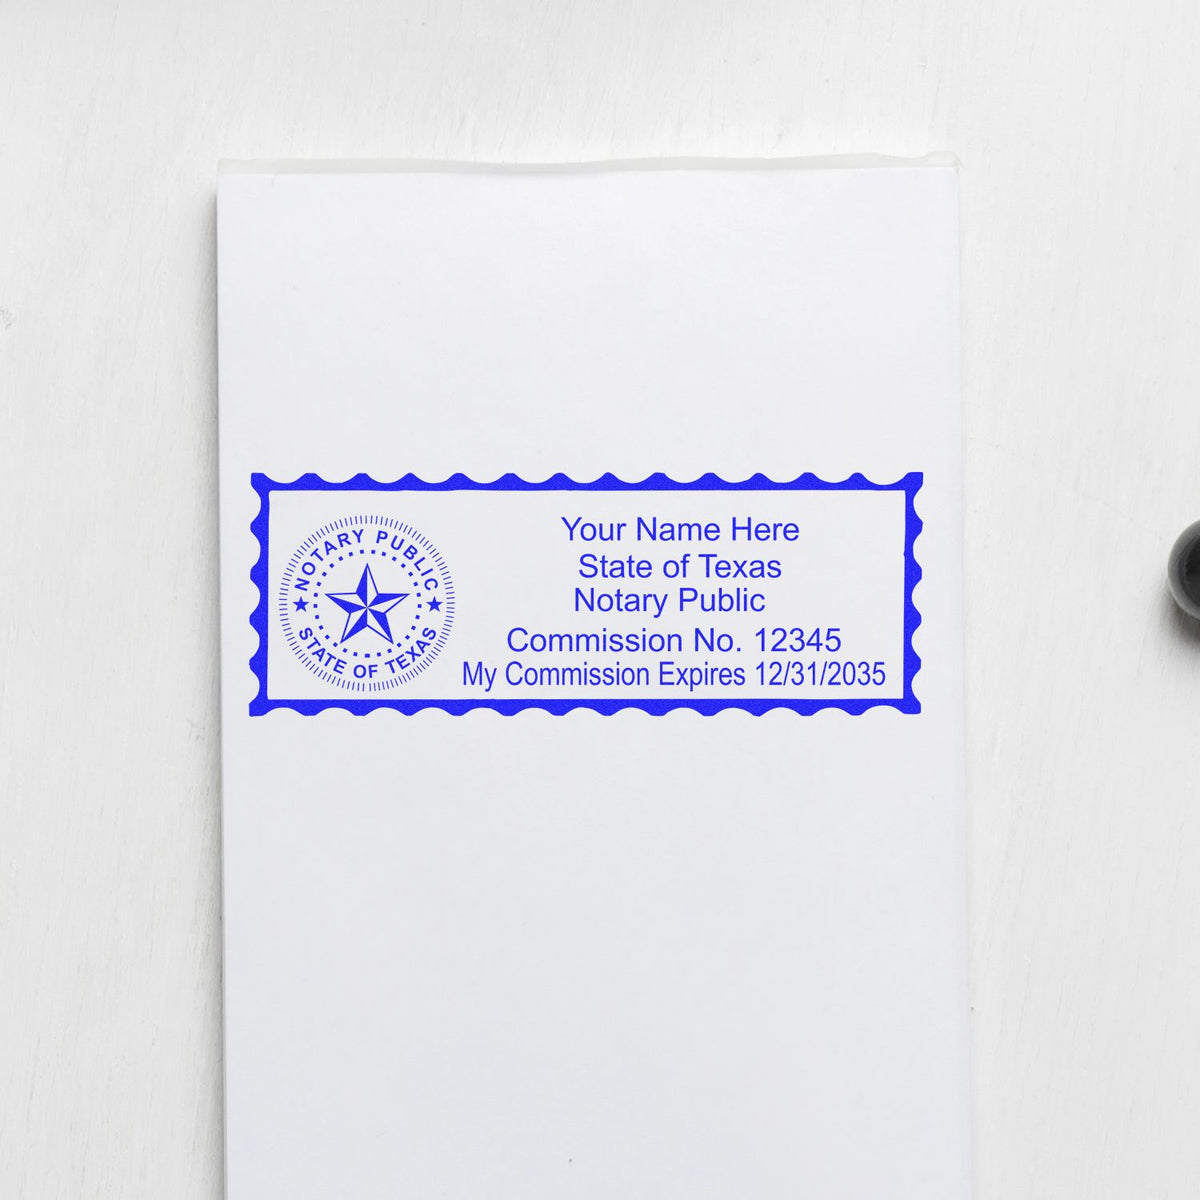 A lifestyle photo showing a stamped image of the Wooden Handle Texas State Seal Notary Public Stamp on a piece of paper